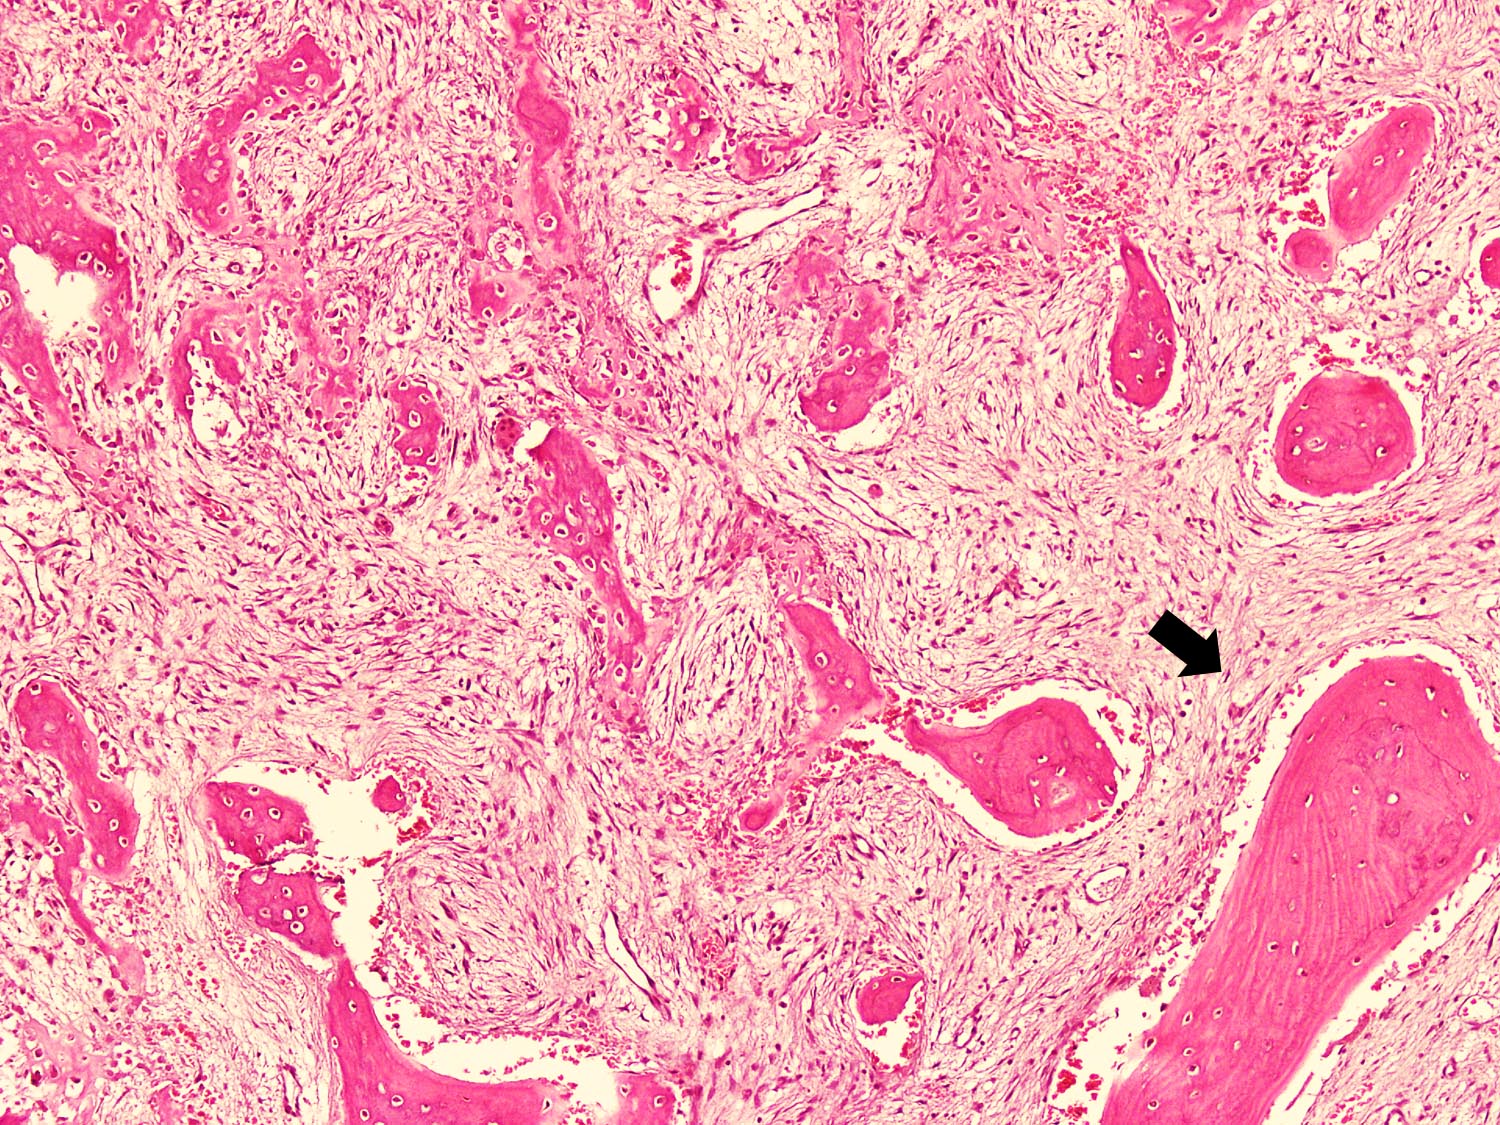 Fibro-osseous lesion with zonation pattern